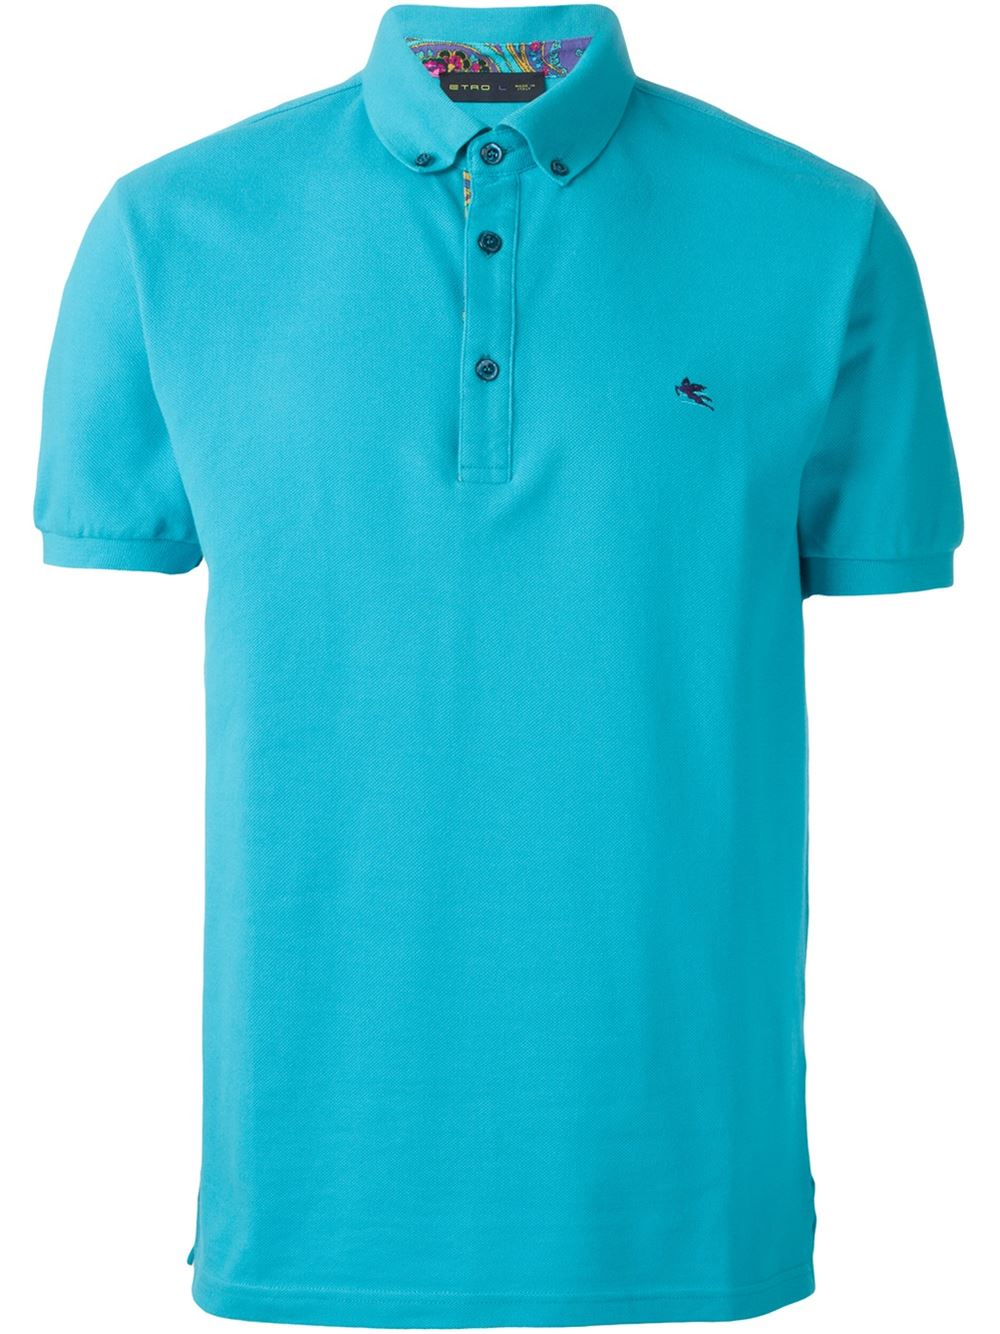 Lyst - Etro Button Down Collar Polo Shirt in Blue for Men